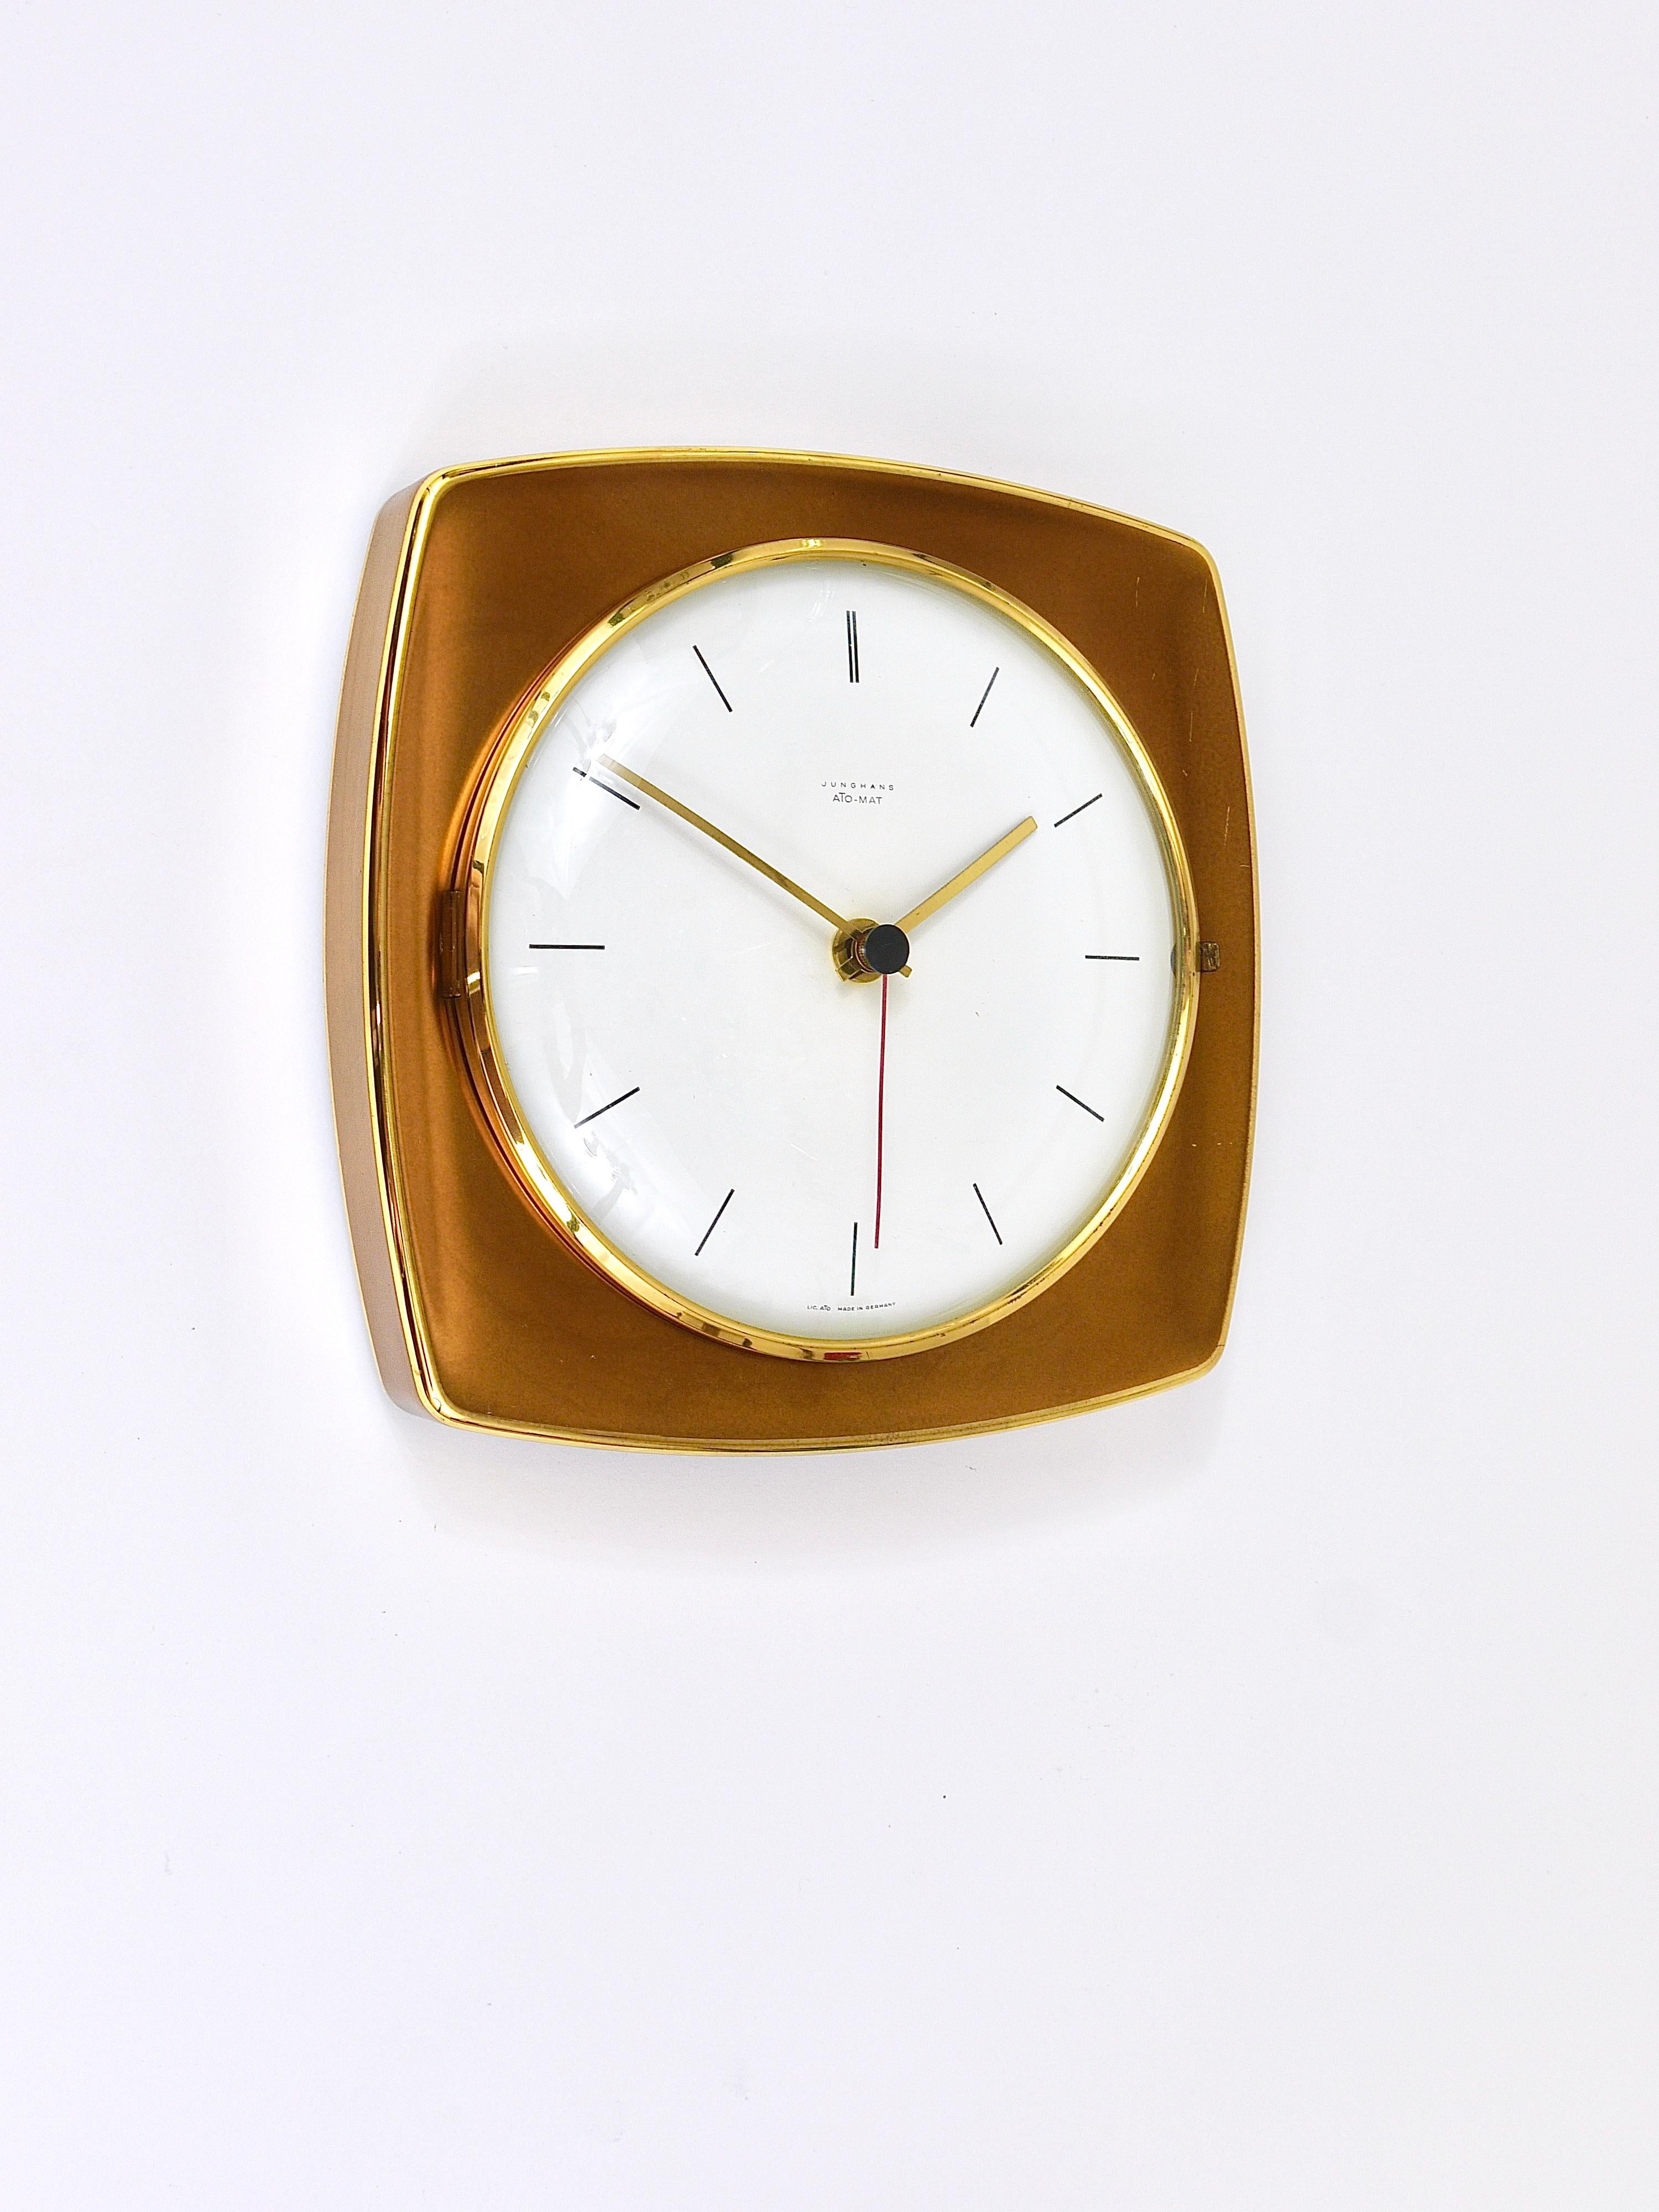 Polished Elegant Mid-Century Junghans Ato-Mat Gold Brass Wall Clock, Germany, 1950s For Sale